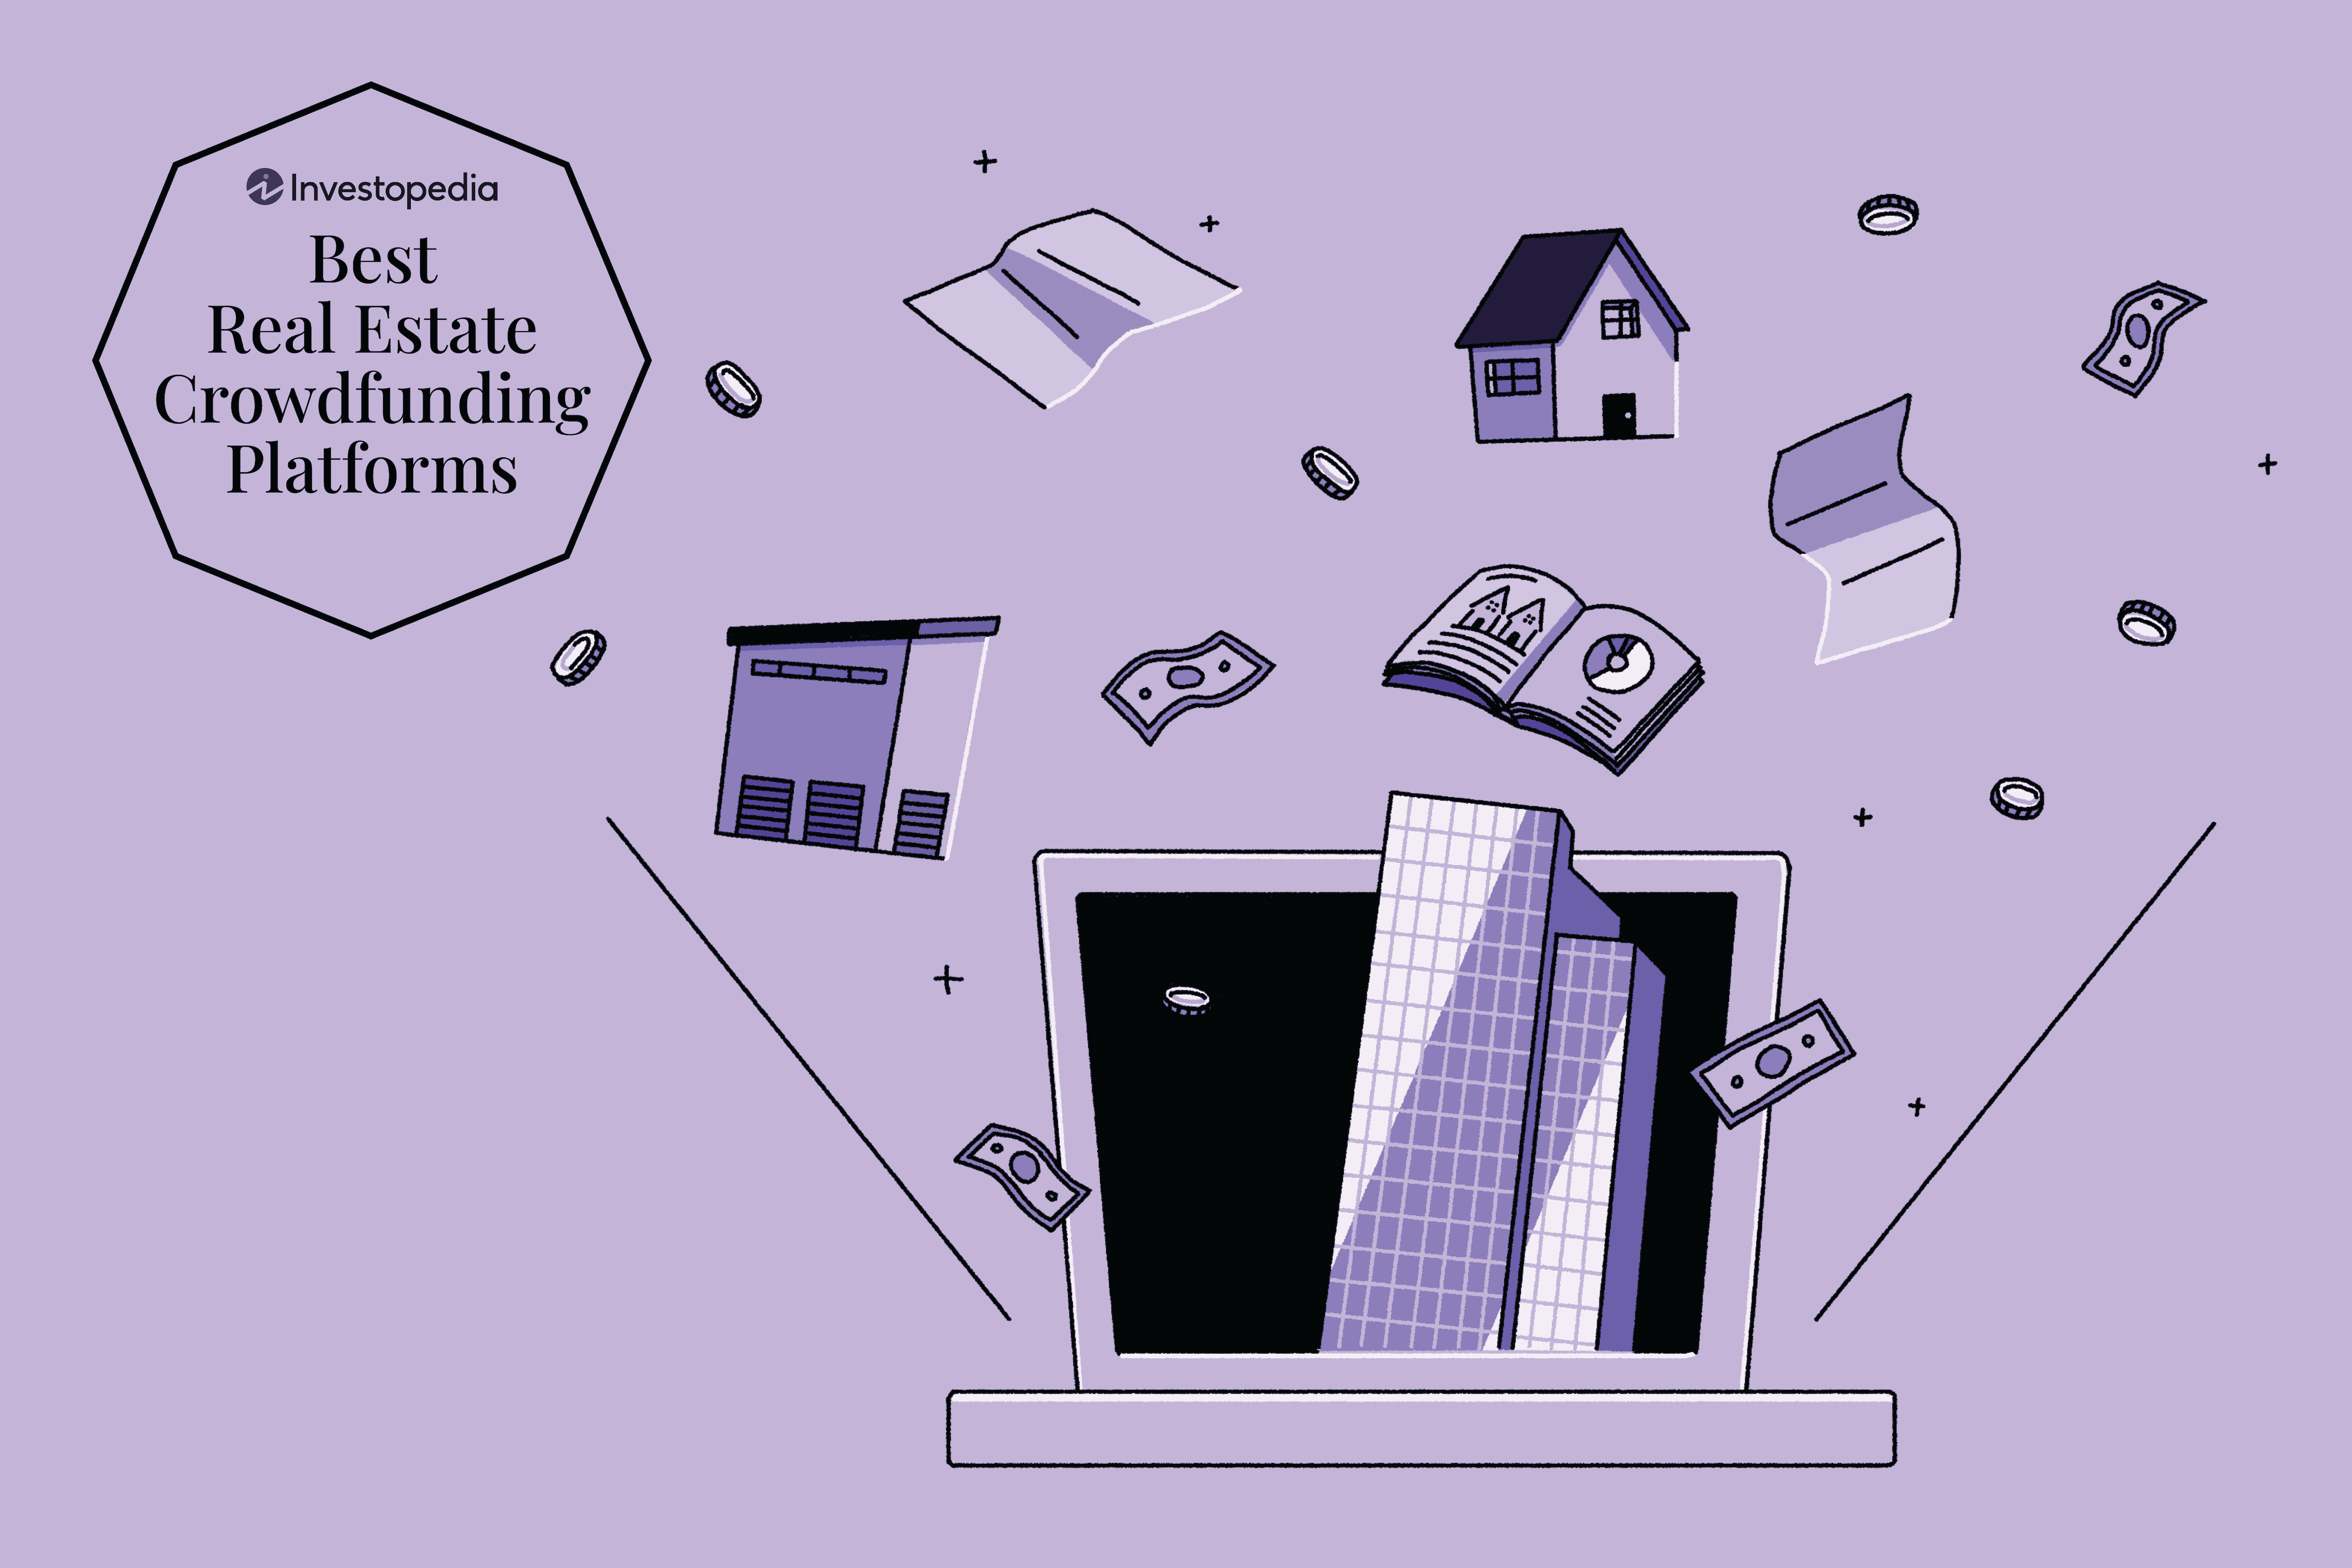 Custom image shows a purple background with several images of a house, a book, cash, coins, a computer, documents. On the top left it says "Investopedia Best Real Estate Crowdfunding Platforms, 2024."